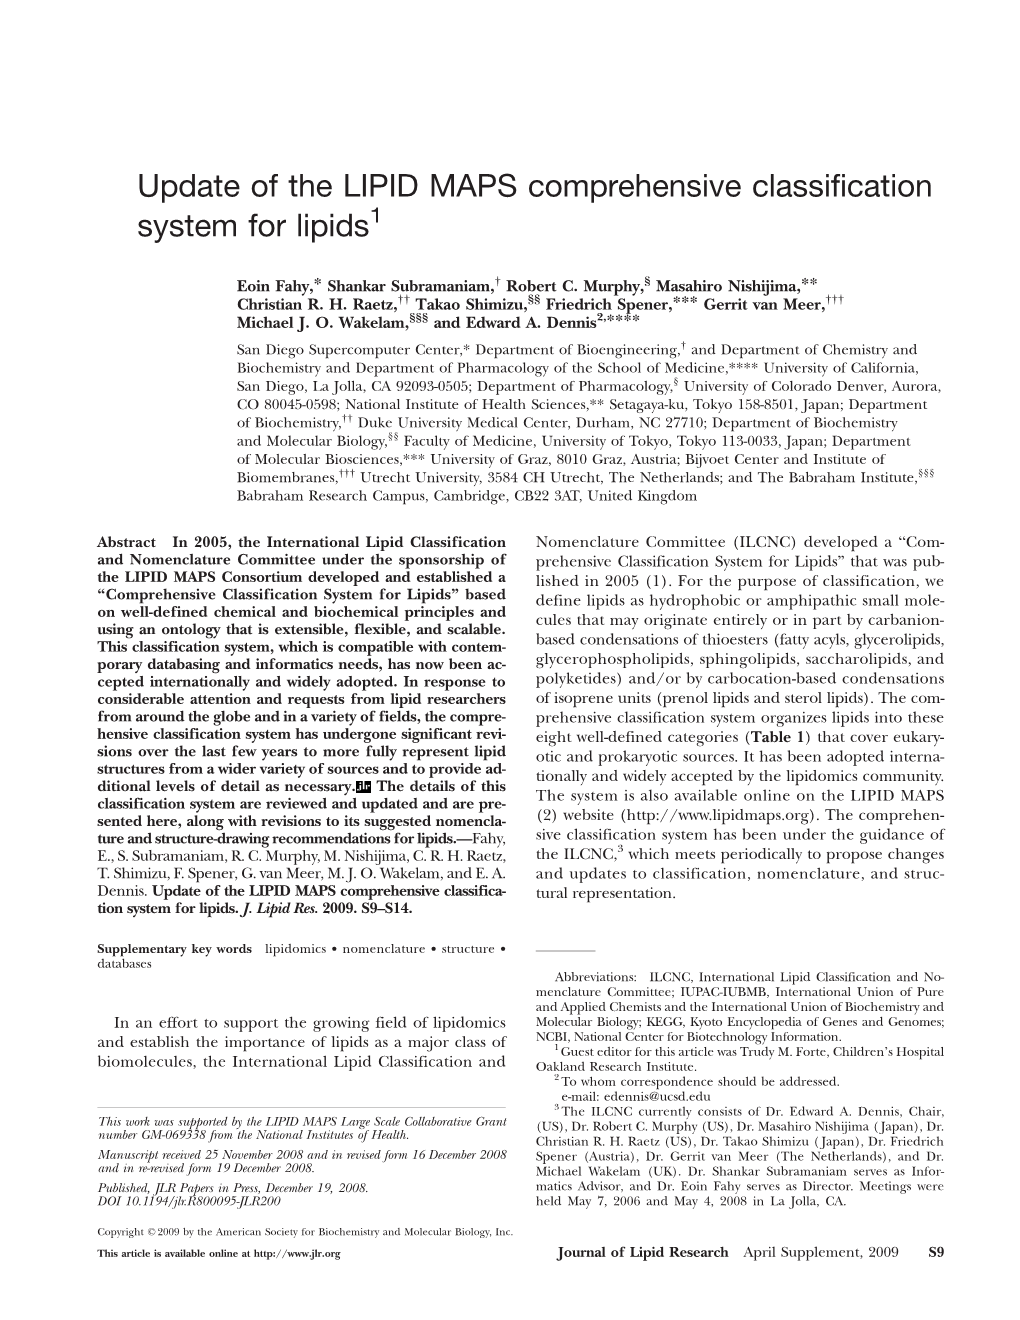 Update of the LIPID MAPS Comprehensive Classification System for Lipids1